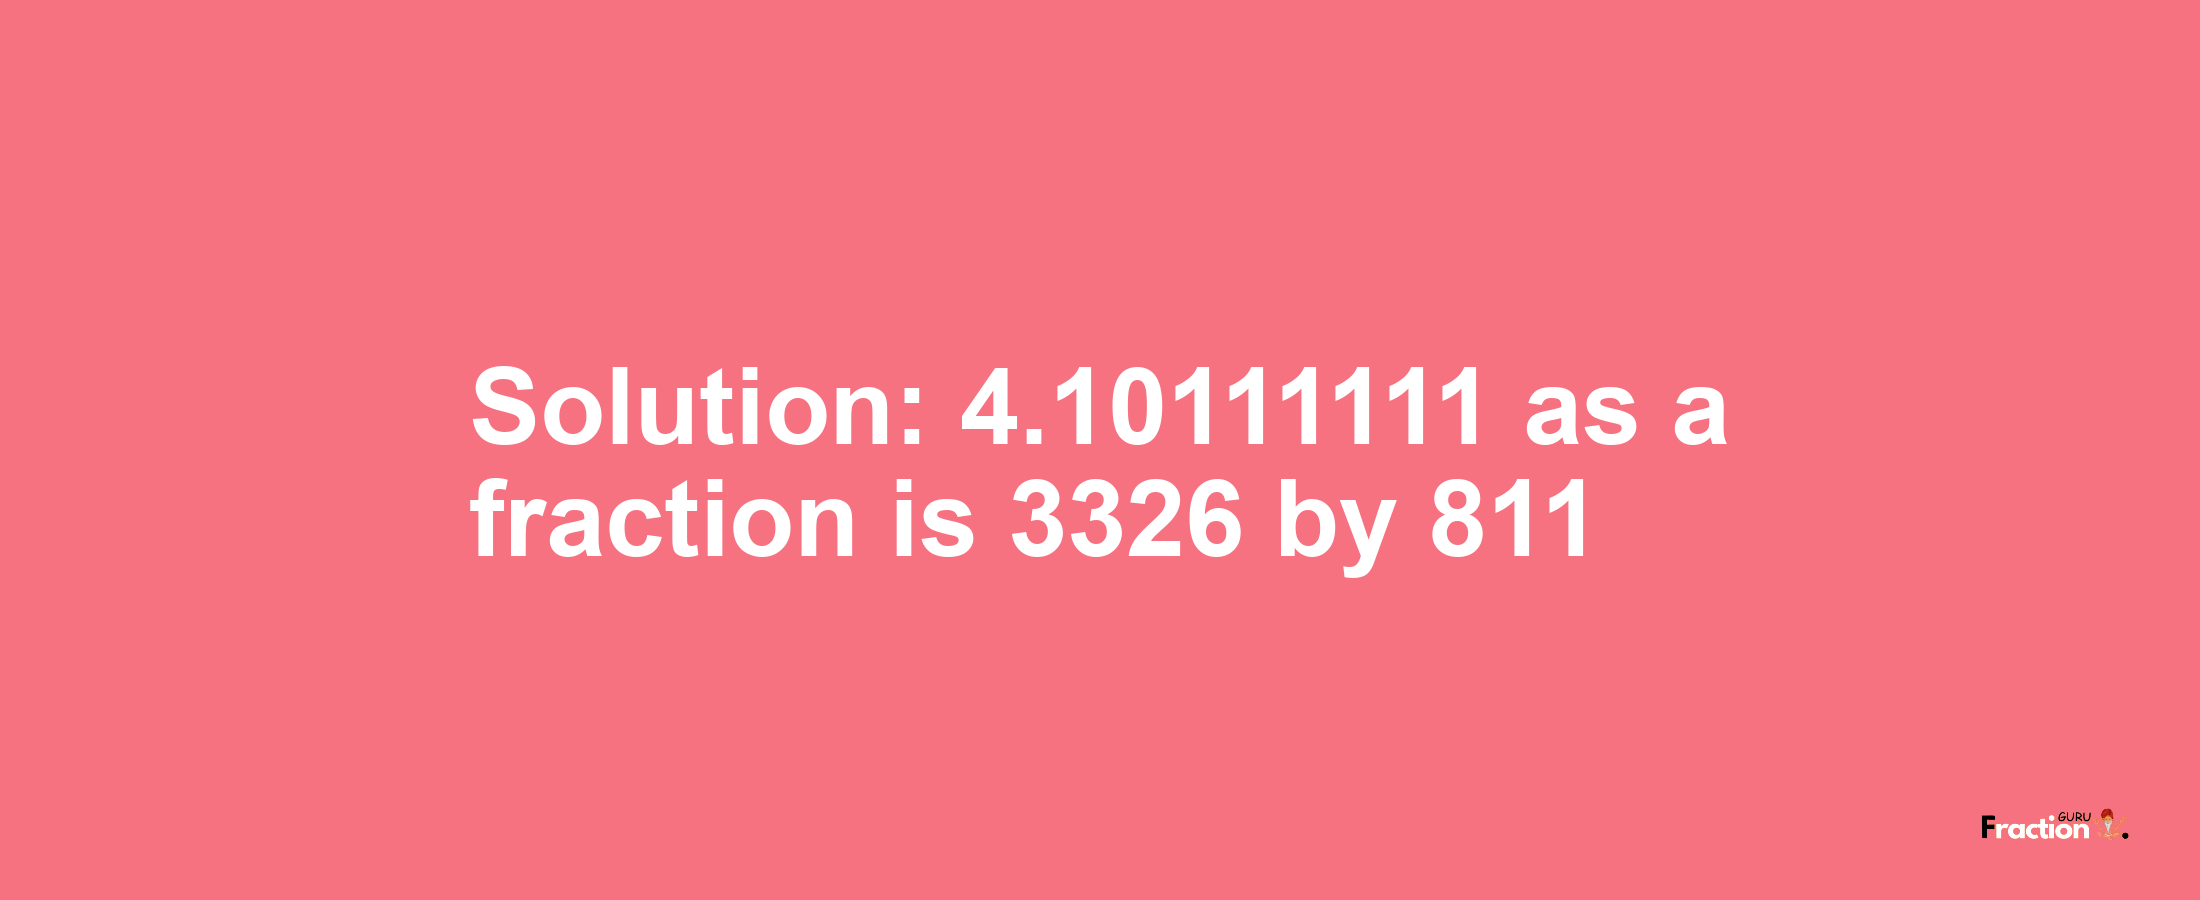 Solution:4.10111111 as a fraction is 3326/811